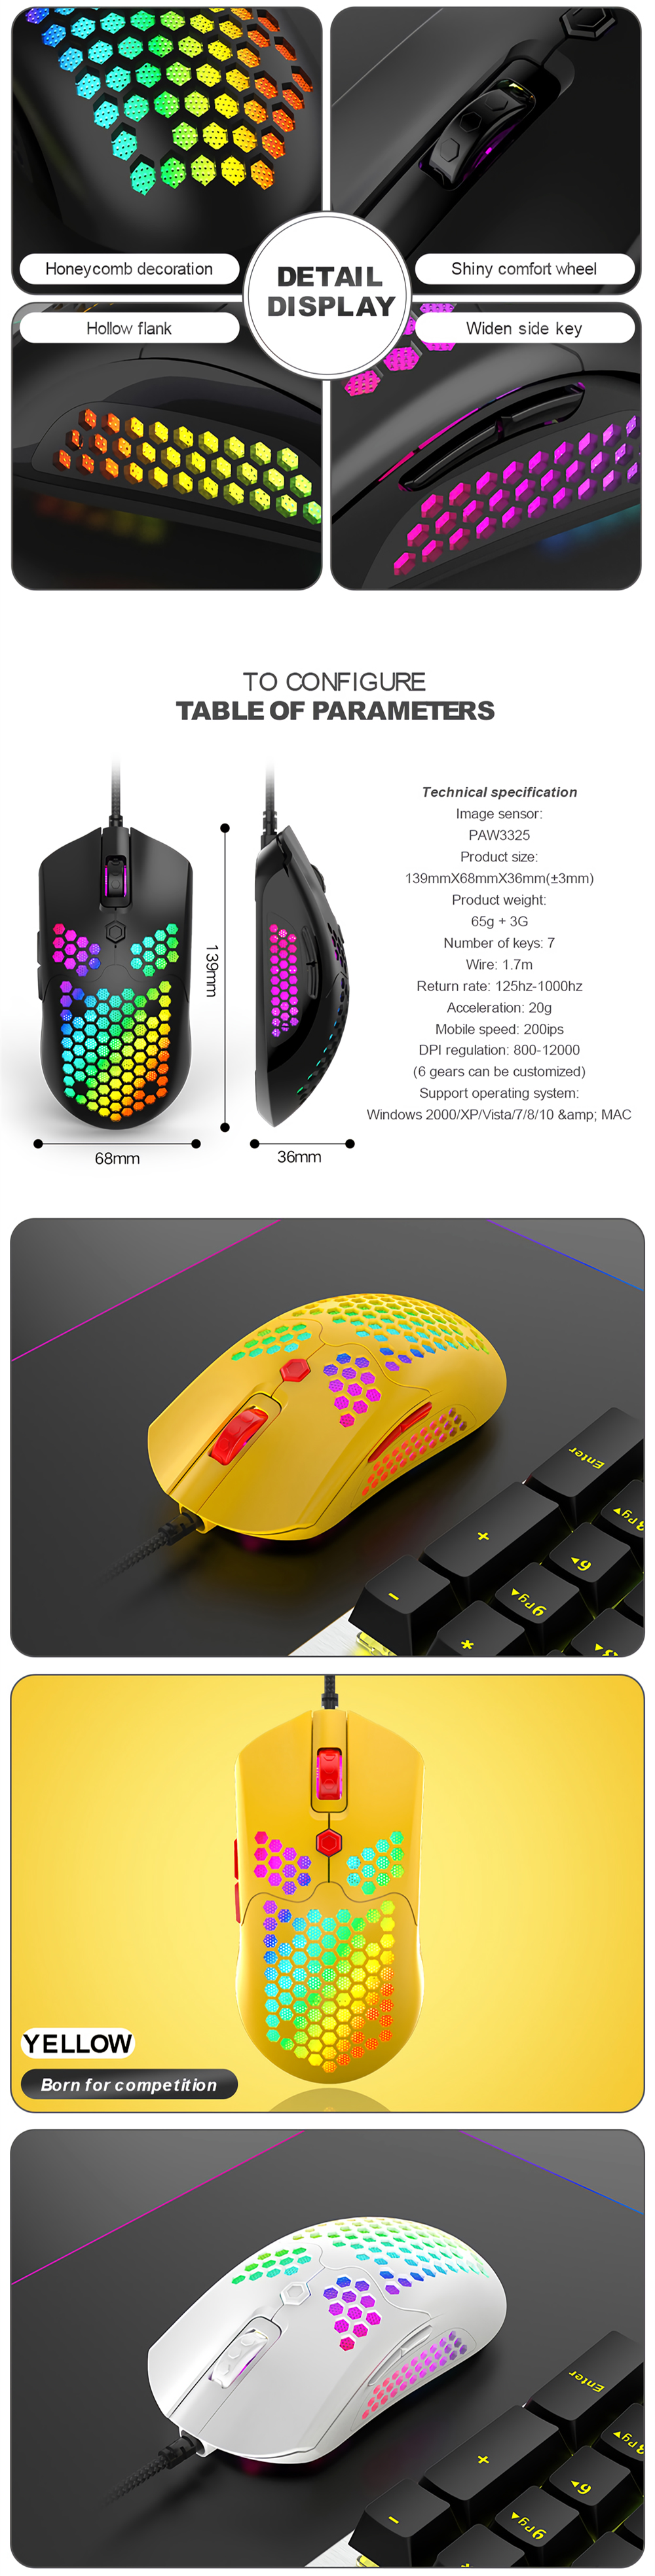 Free-wolf M5 Wired Game Mouse Breathing RGB Colorful Hollow Honeycomb Shape 12000DPI Gaming Mouse USB Wired Gamer Mice for Desktop Computer Laptop PC 19